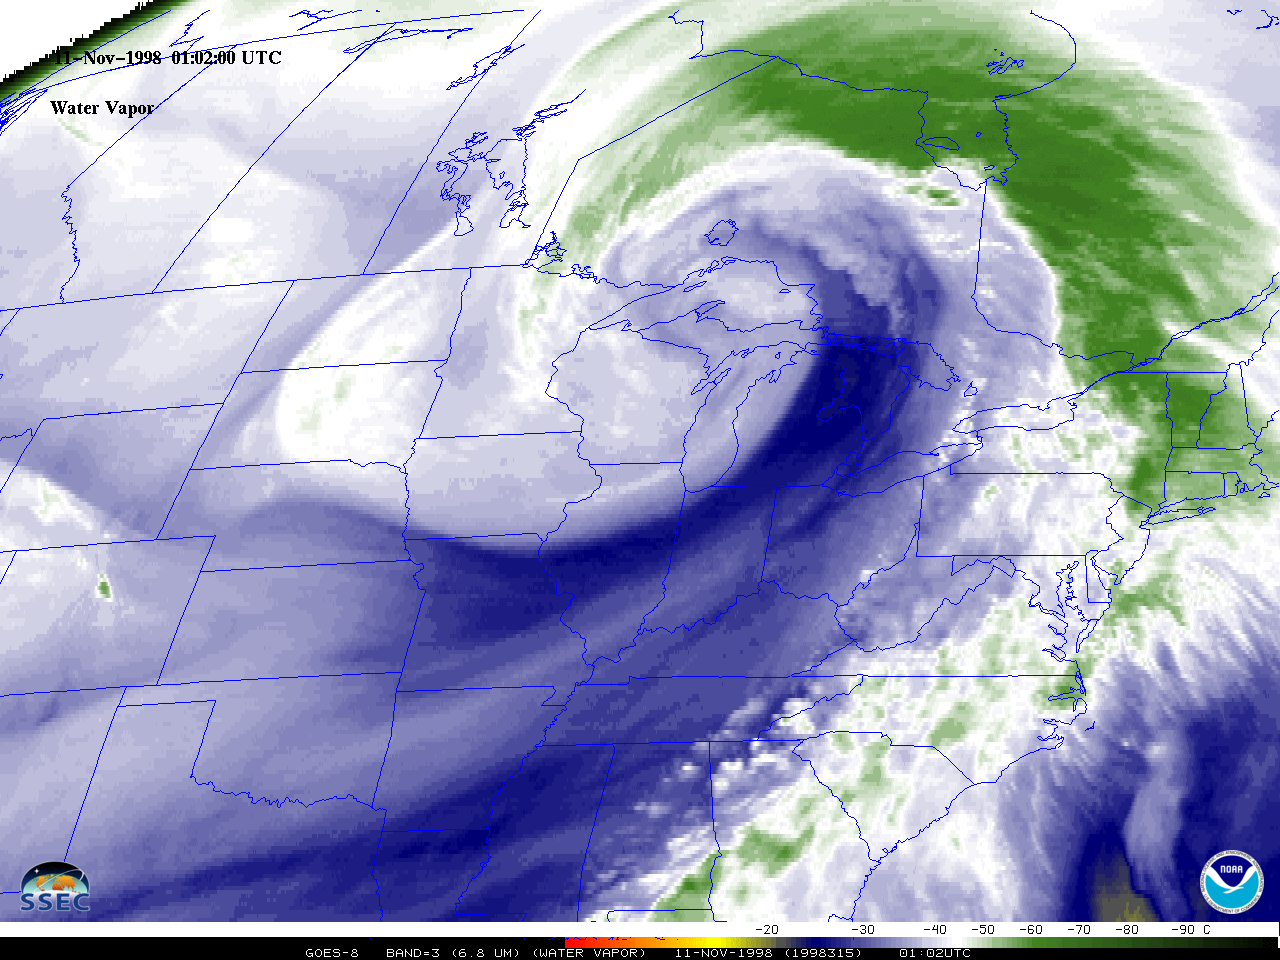 GOES-8 Water Vapor (6.7 µm) images [click to play MP4 animation]